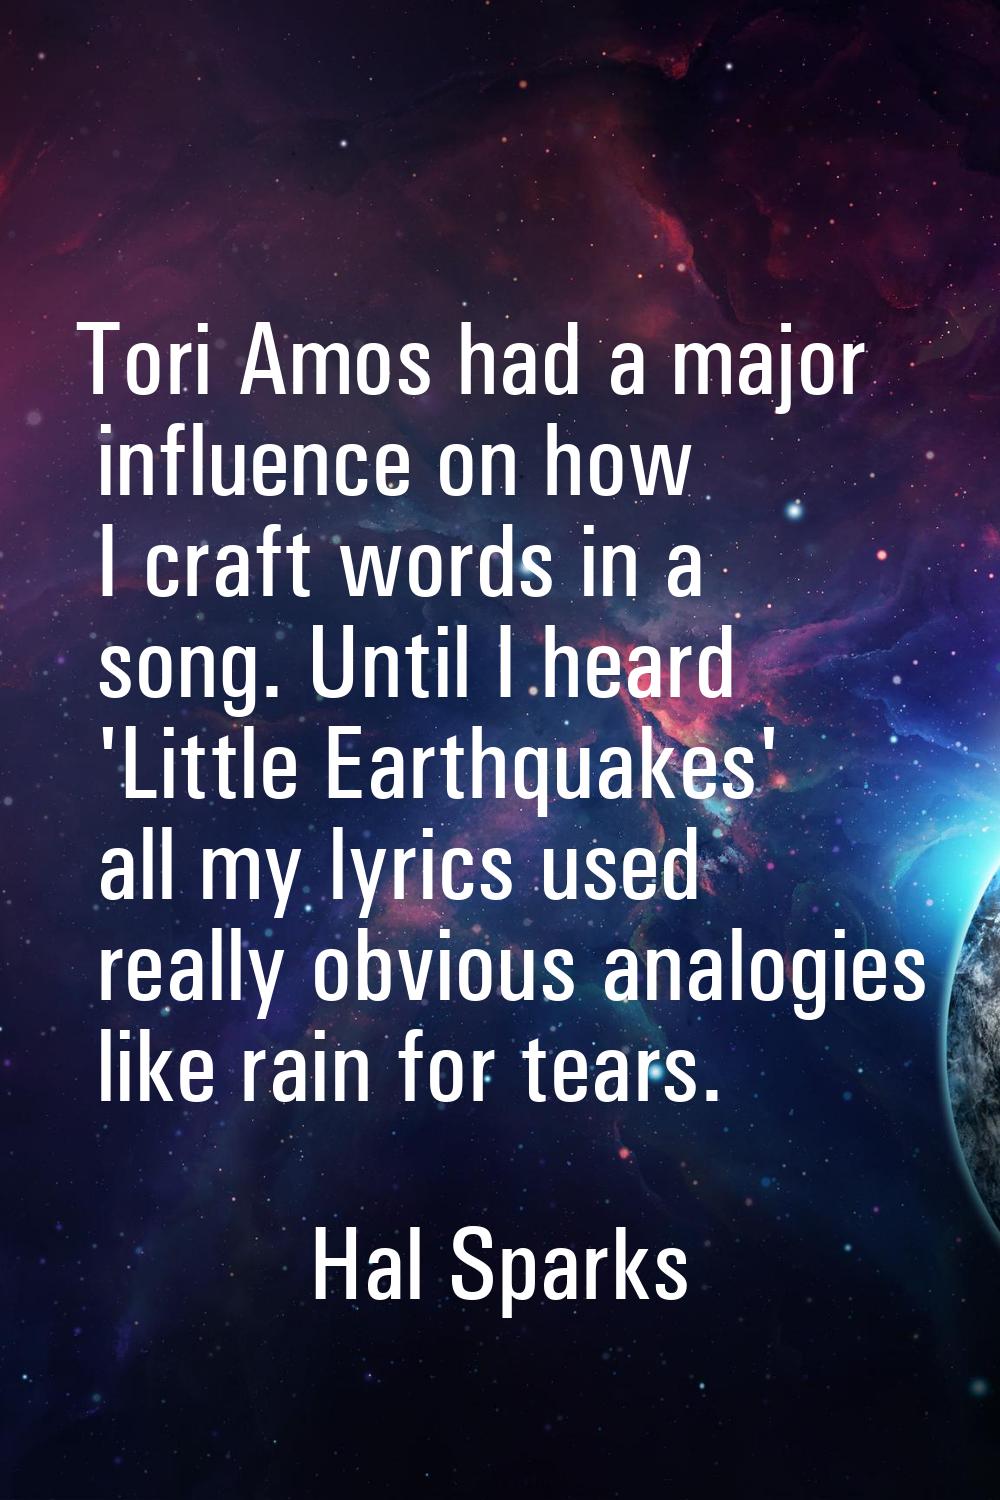 Tori Amos had a major influence on how I craft words in a song. Until I heard 'Little Earthquakes' 